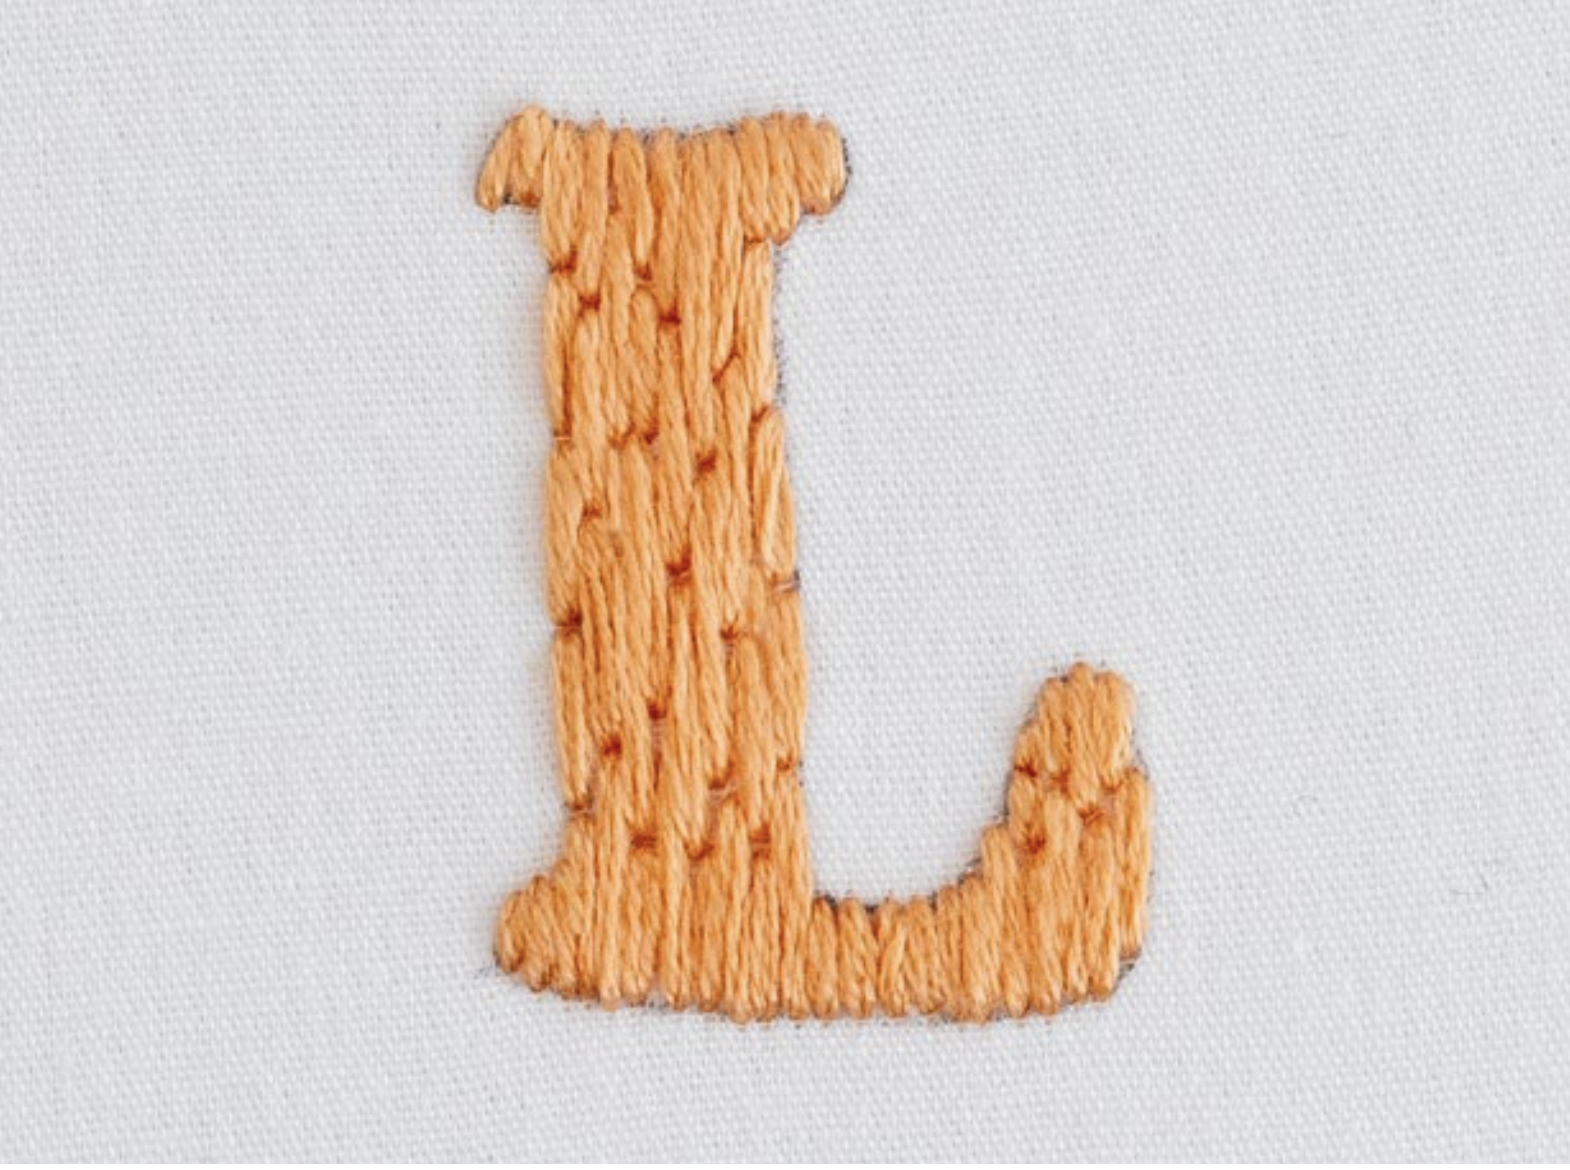 The letter L is stitched using long and short stitch.